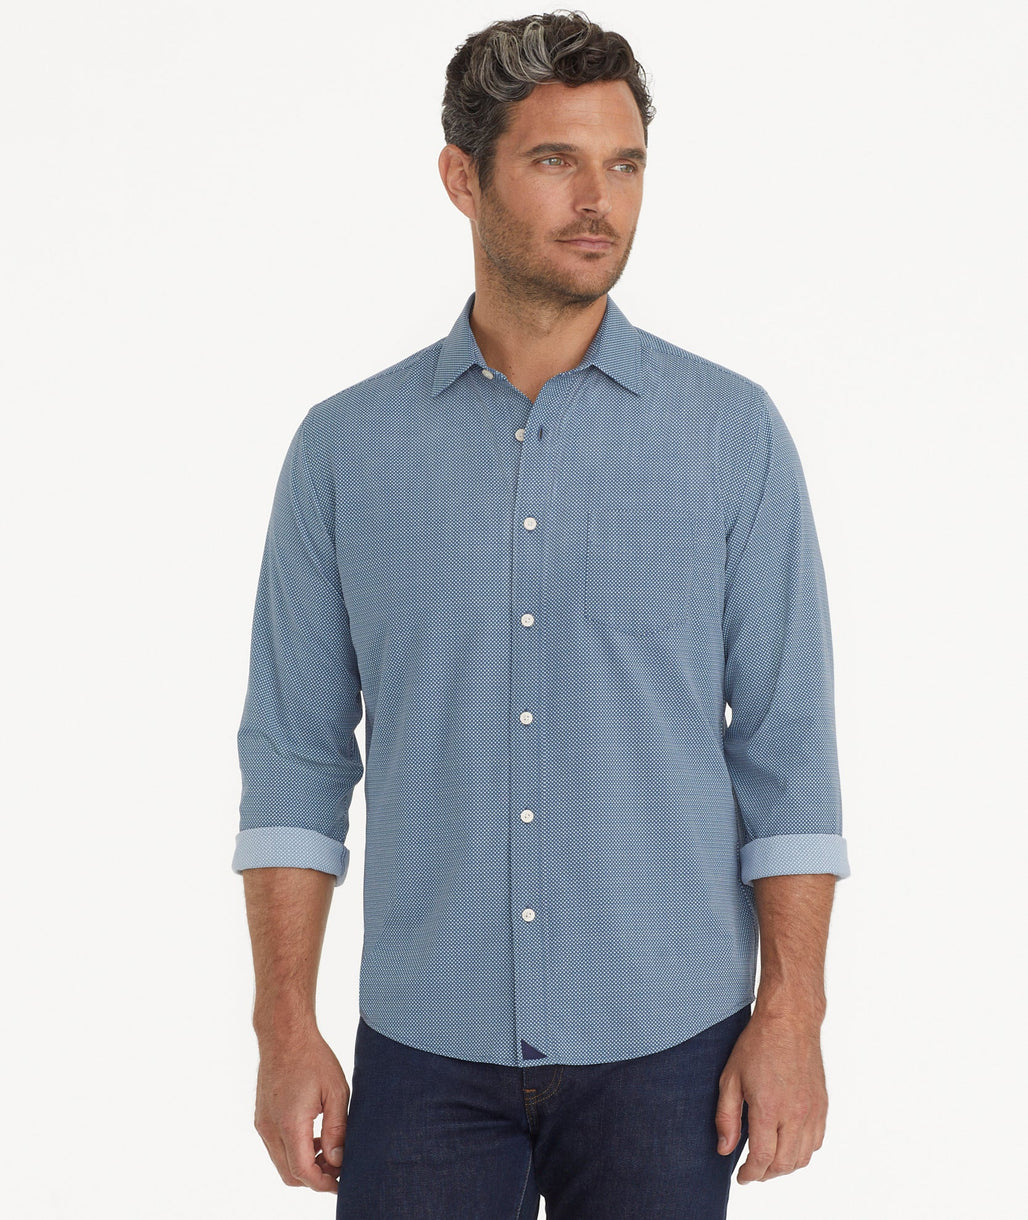 Model is wearing UNTUCKit Wrinkle-Free Performance Benny Shirt in Navy Grounded Gold & White Dot Print.